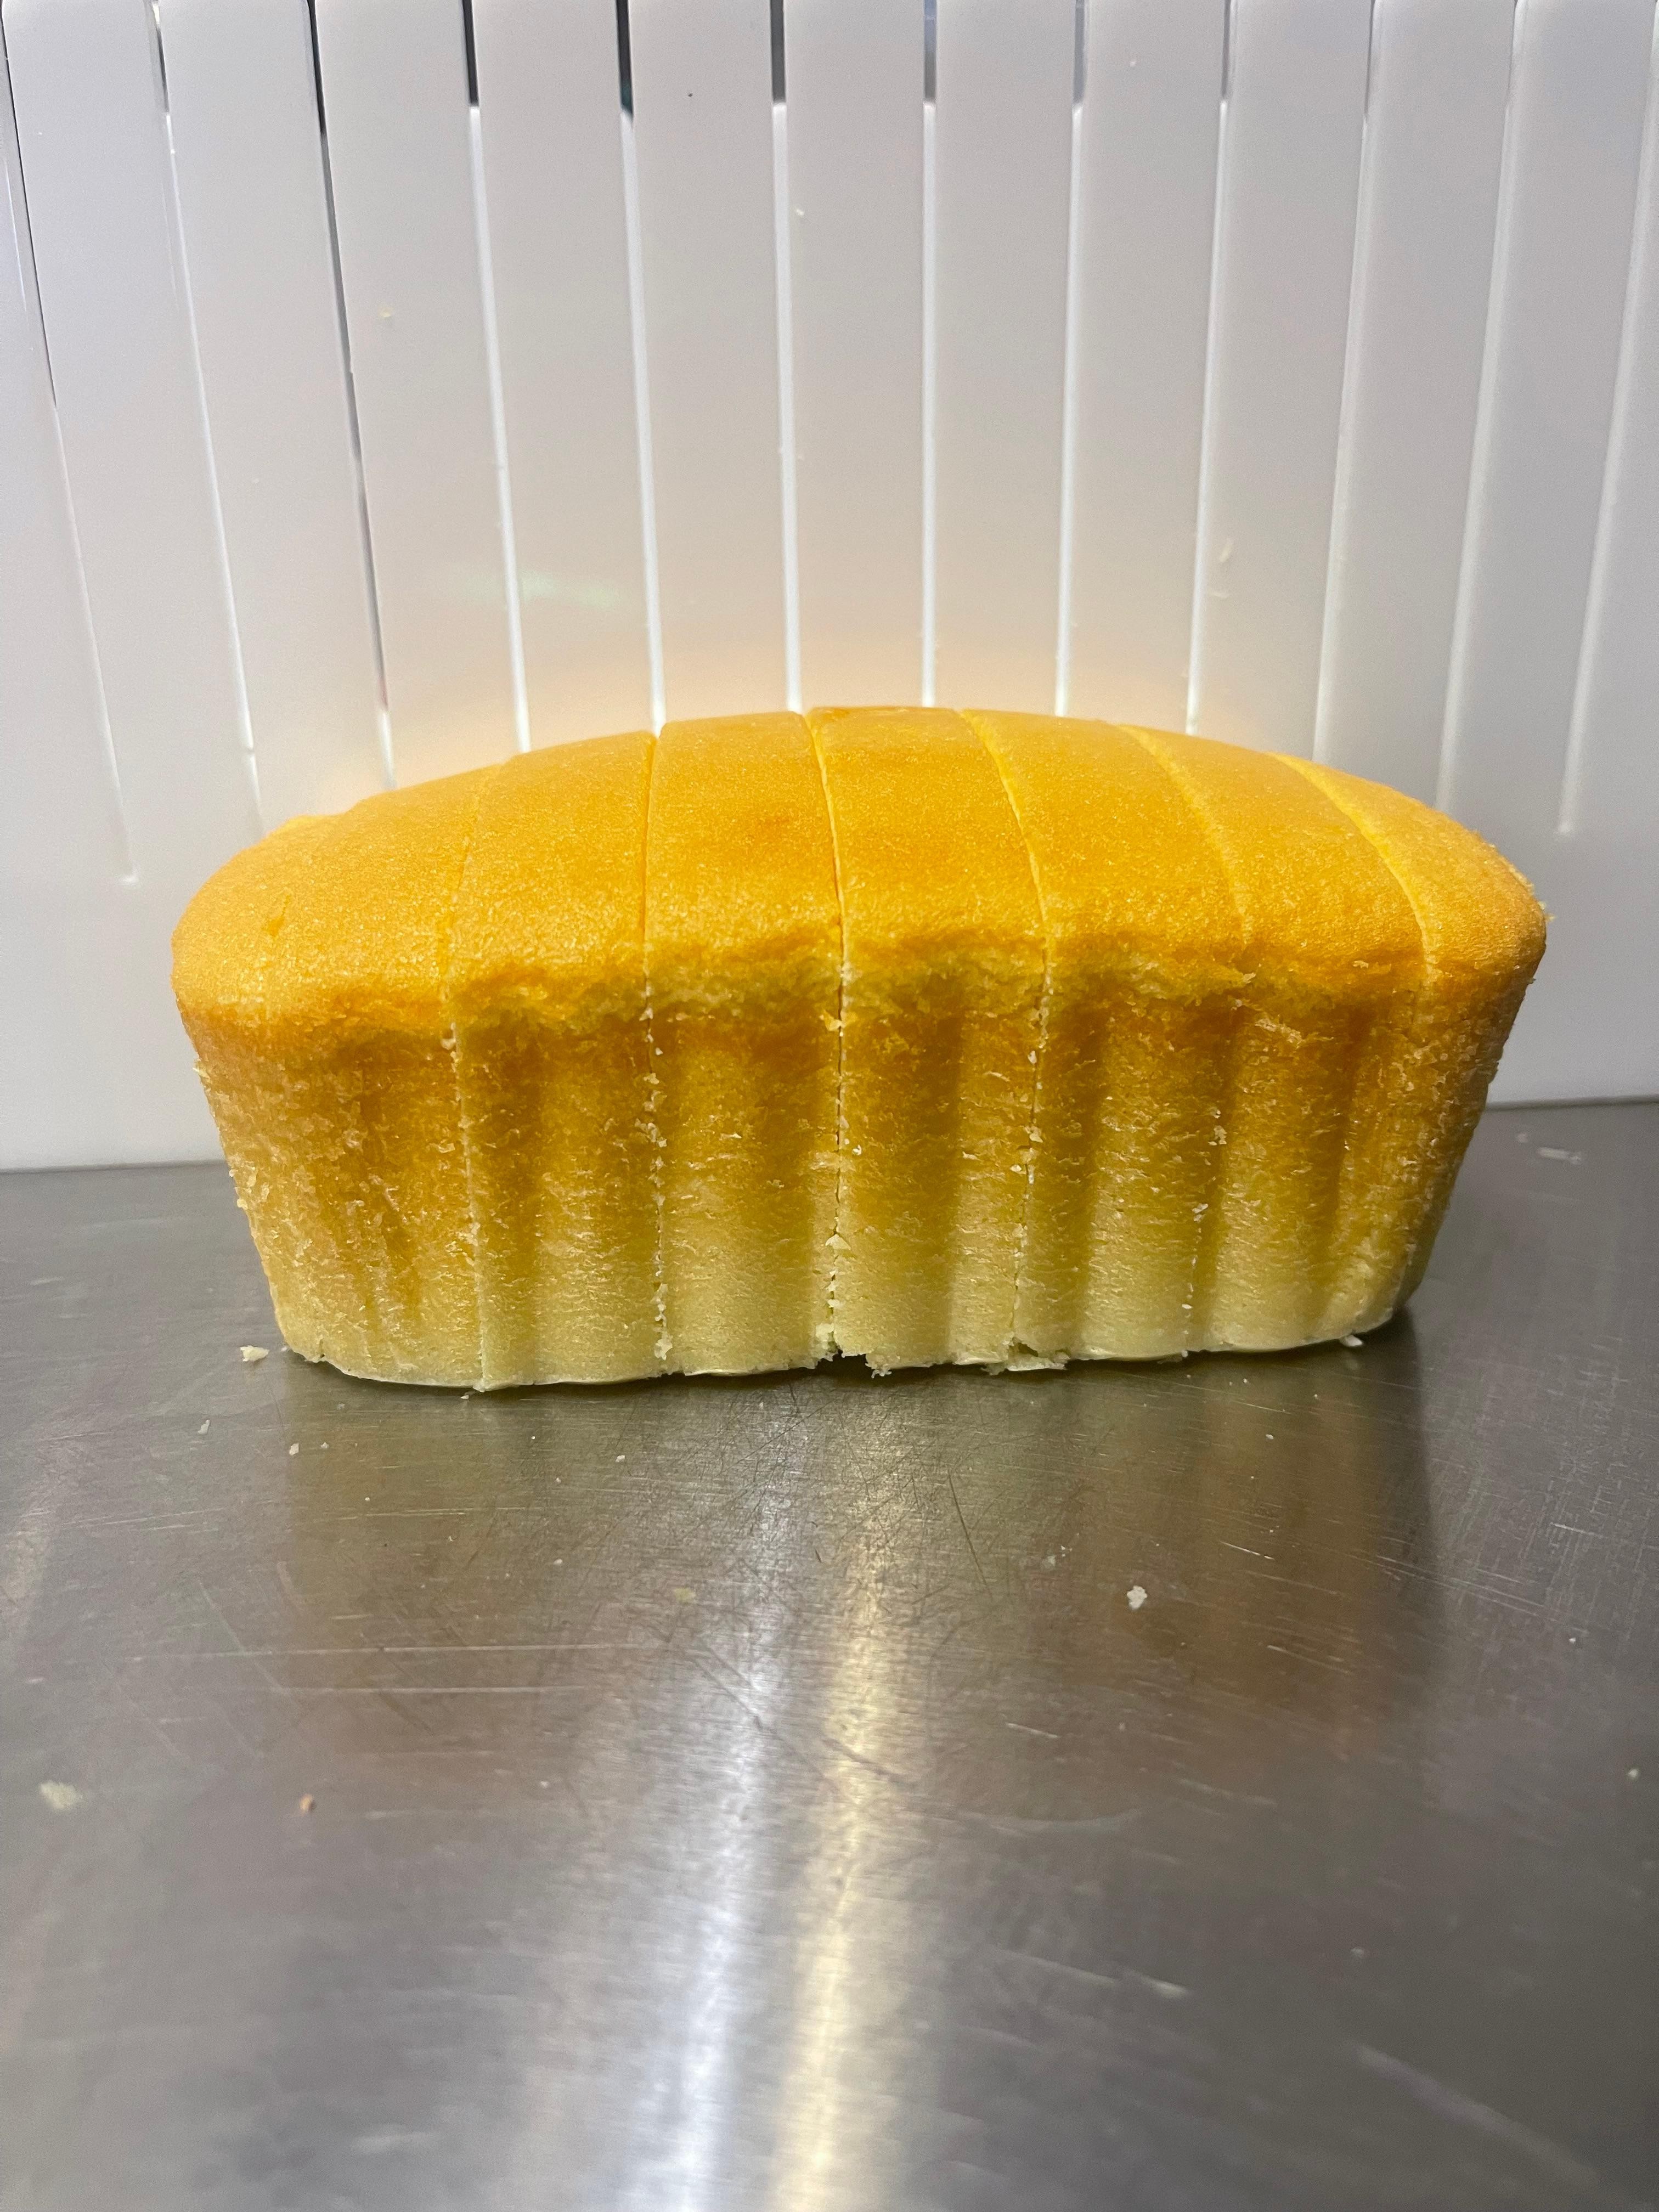 Small loaf Vanilla buttercake